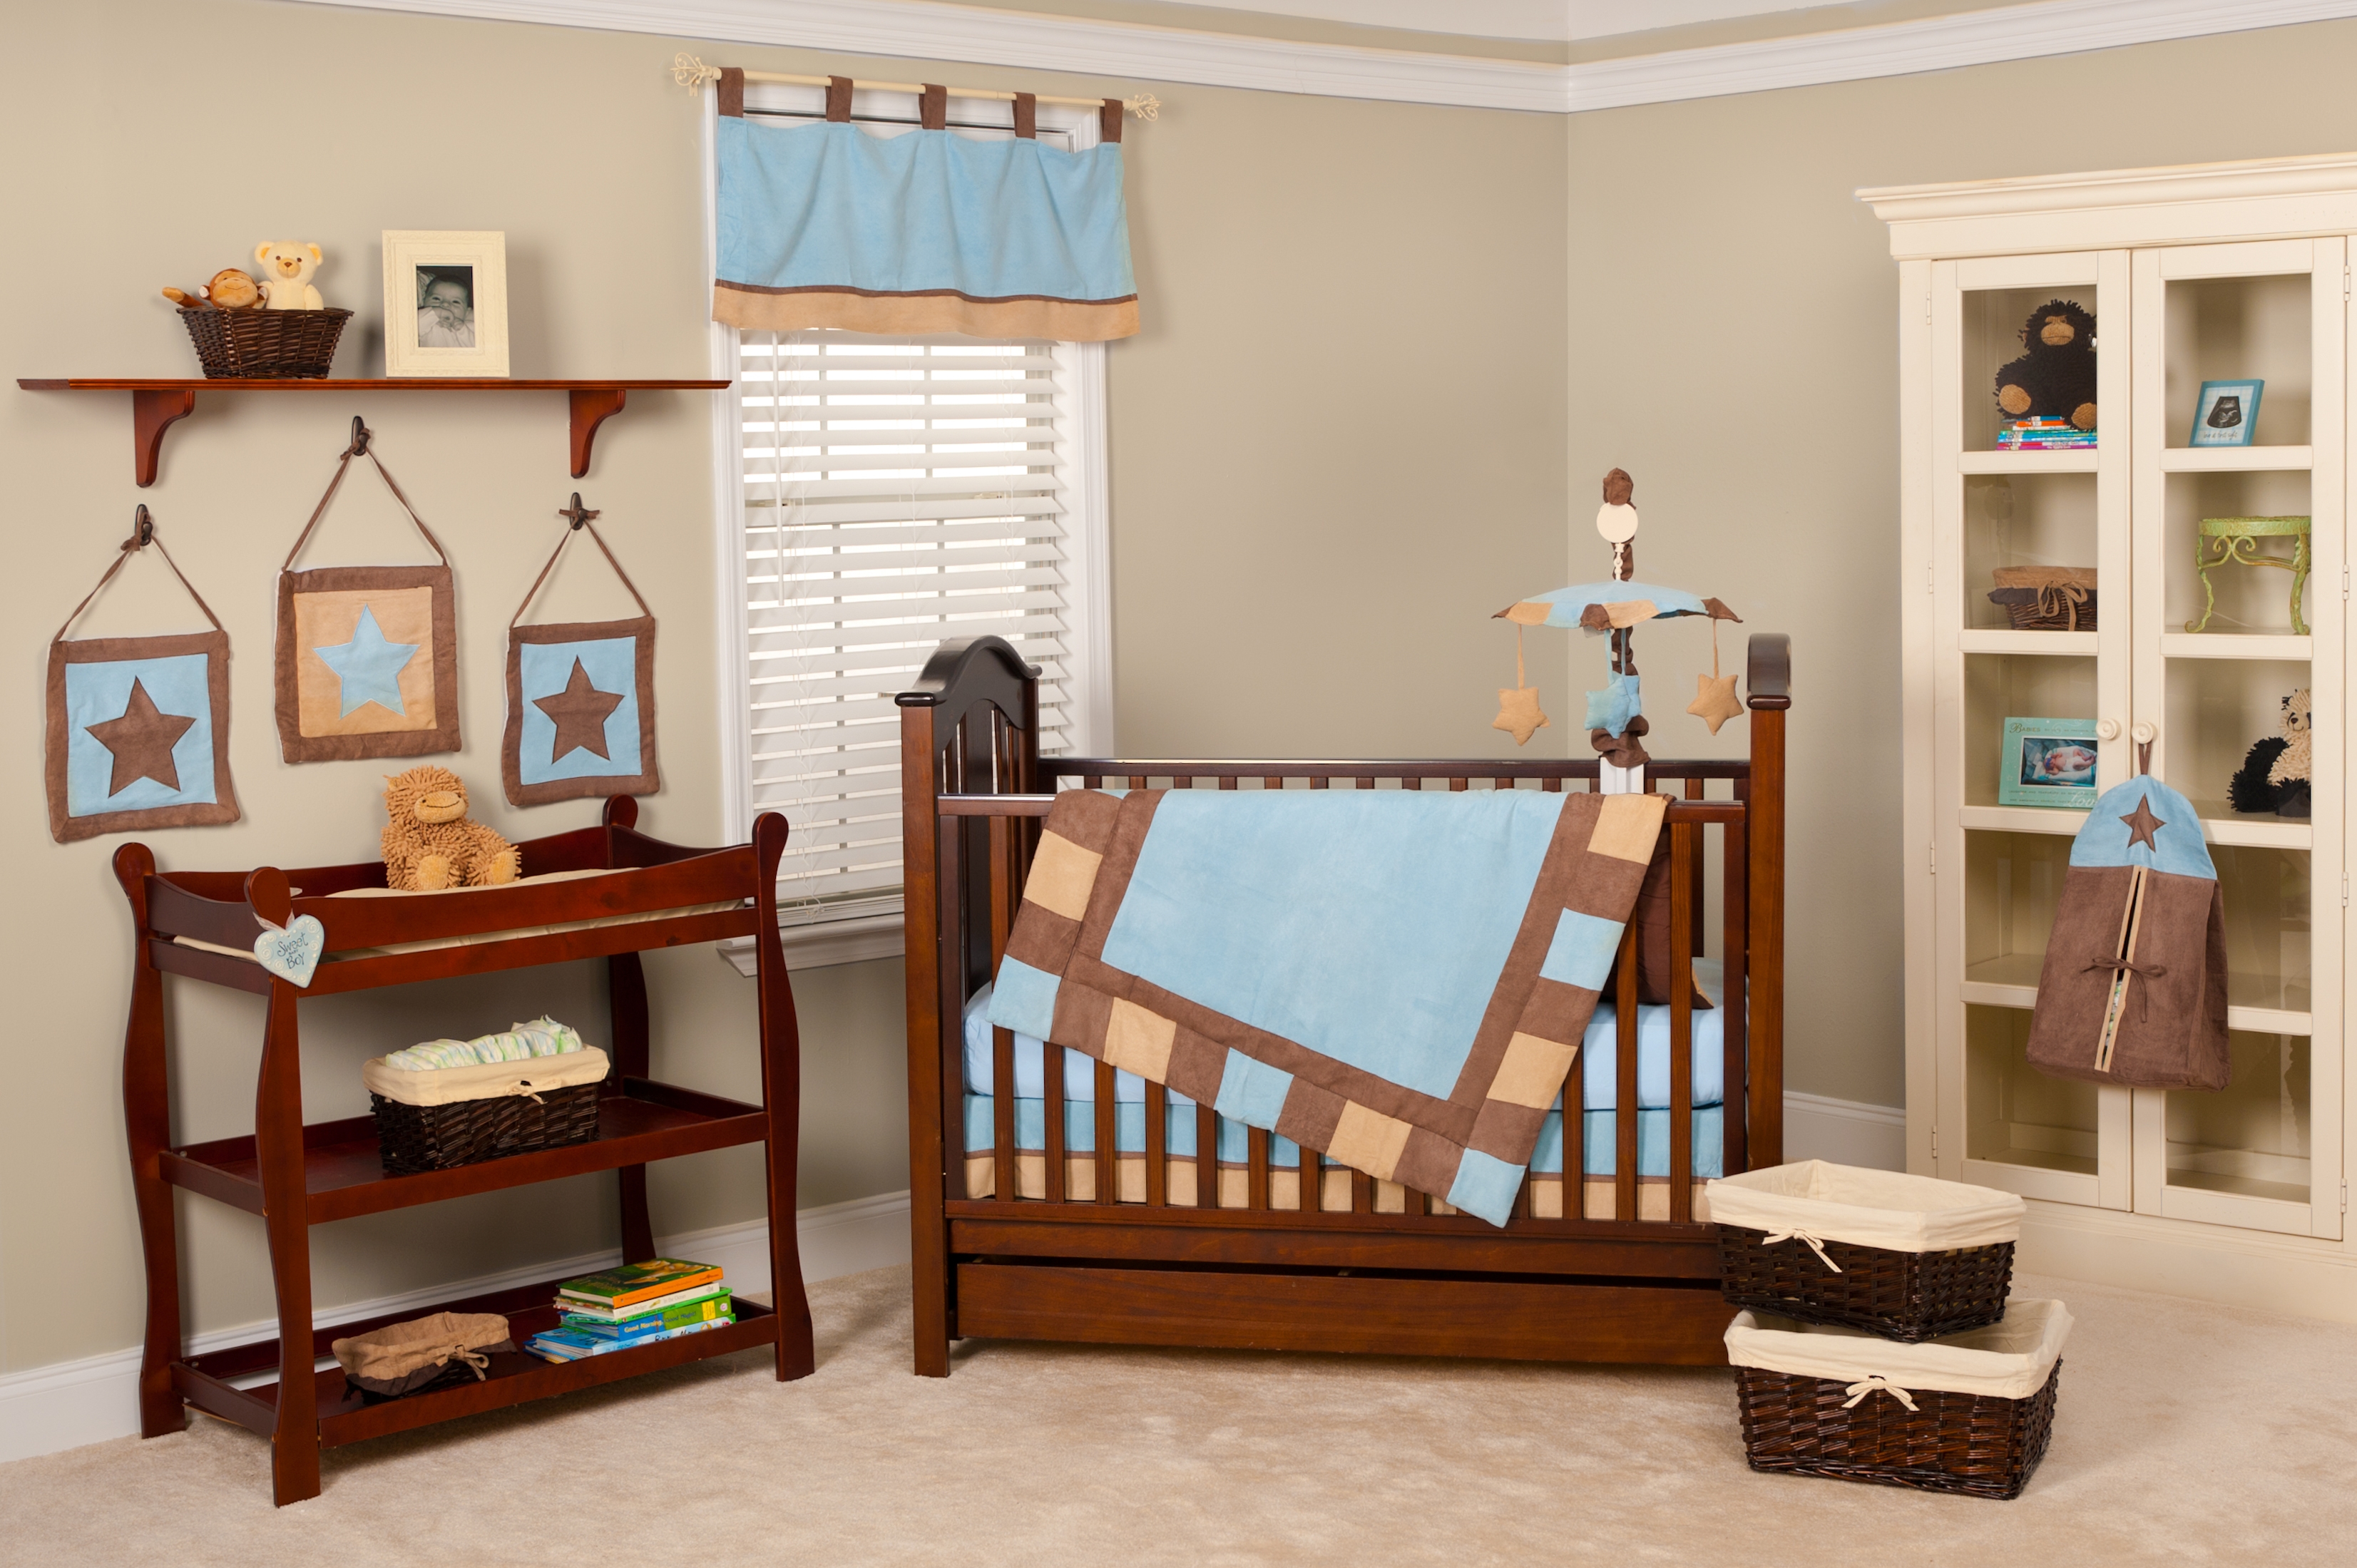 Designing A Baby’s Room ? Consider the Following Points